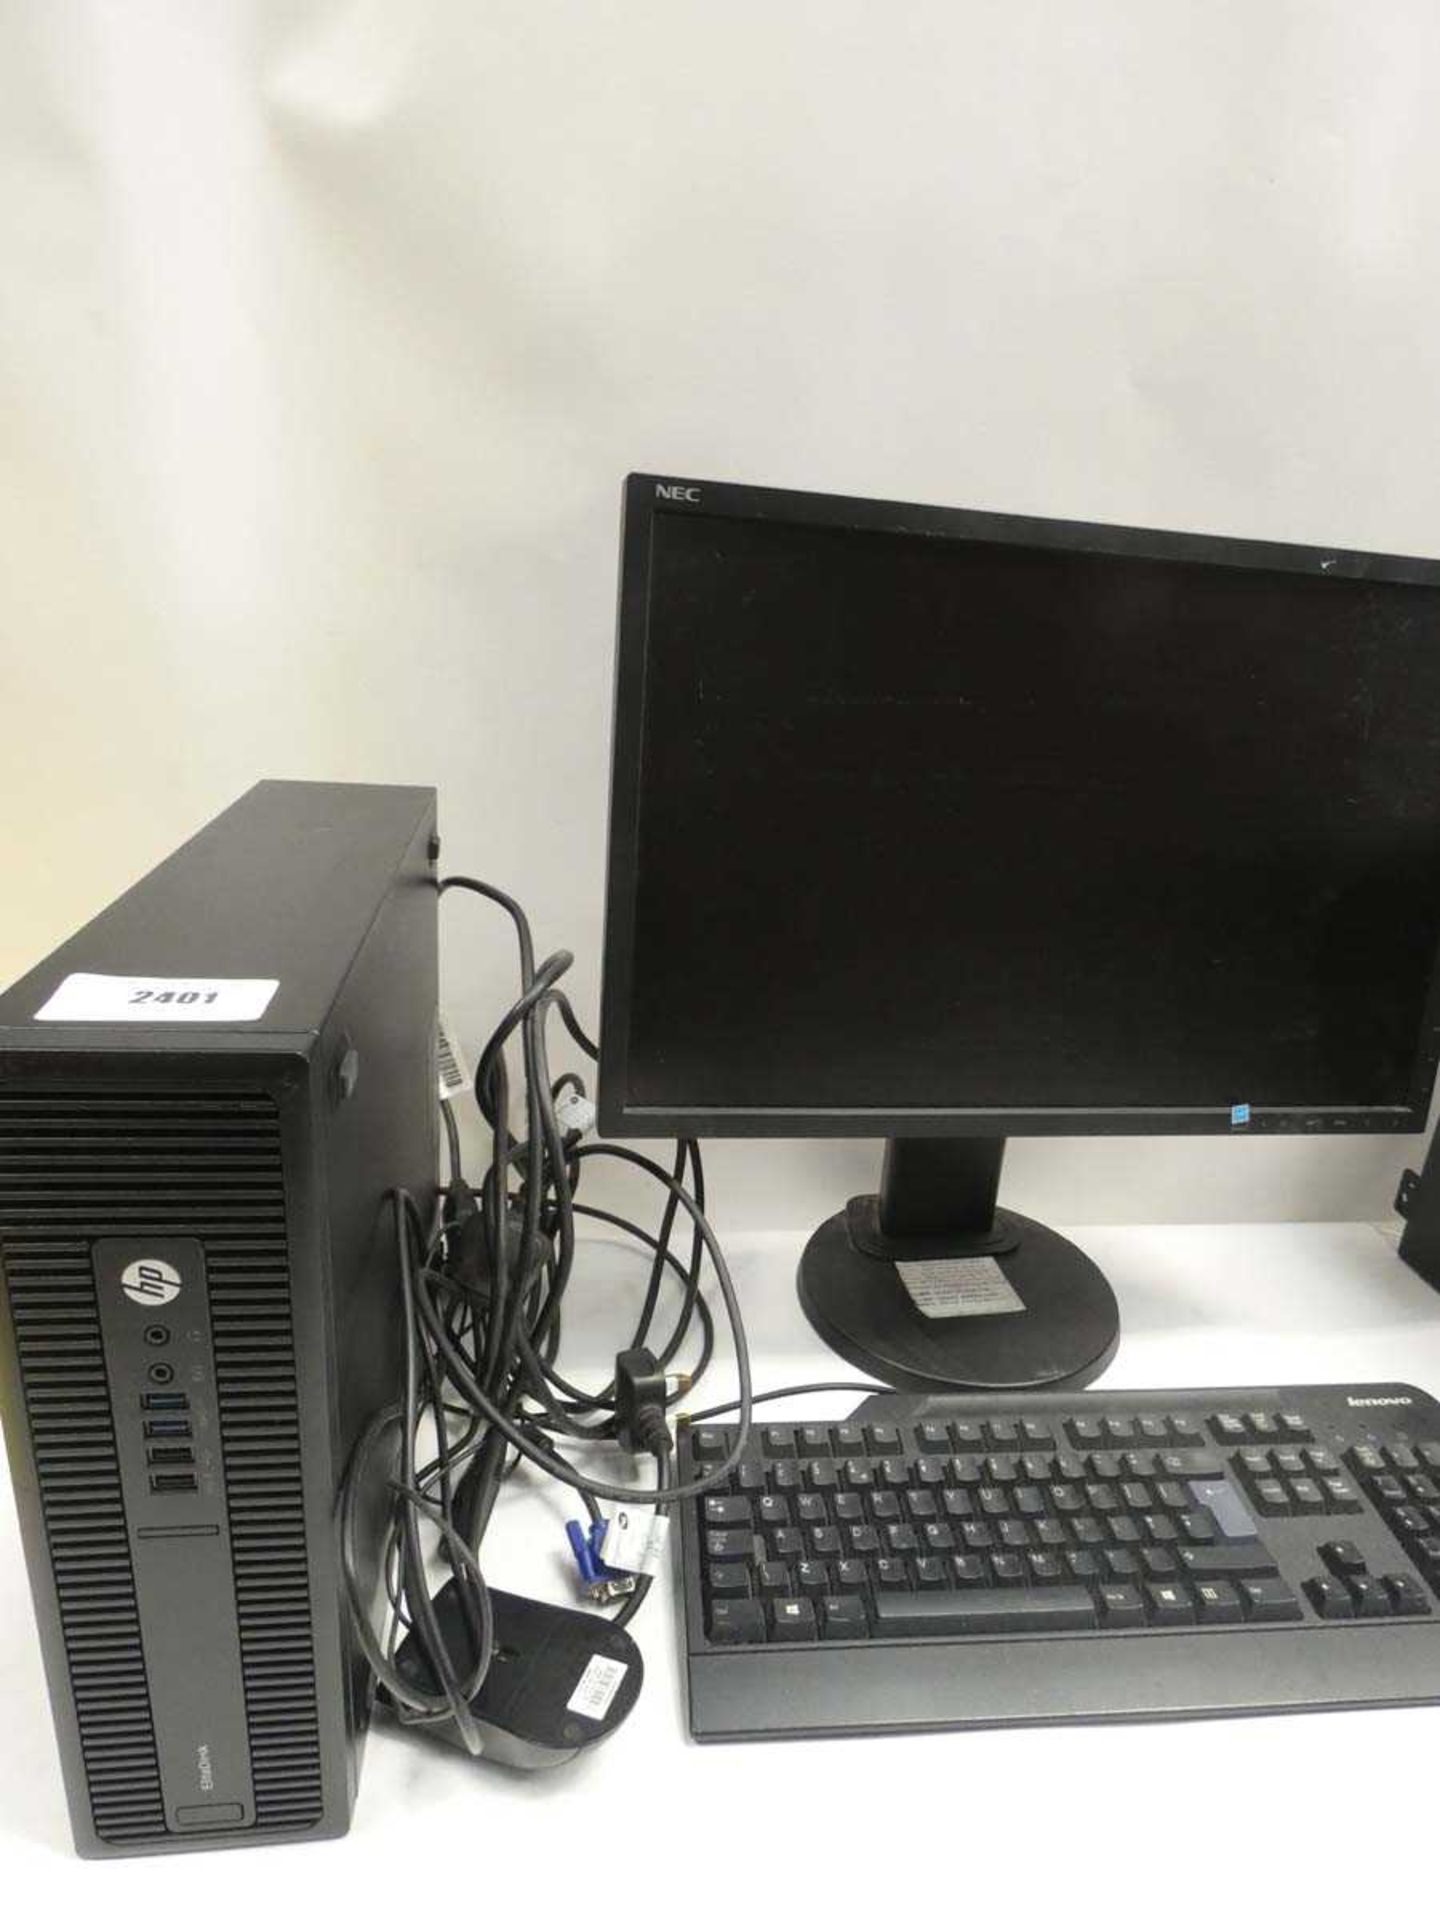 +VAT HP EliteDesk PC tower (no HDD) with NEC 23" monitor and Lenovo keyboard / mouse